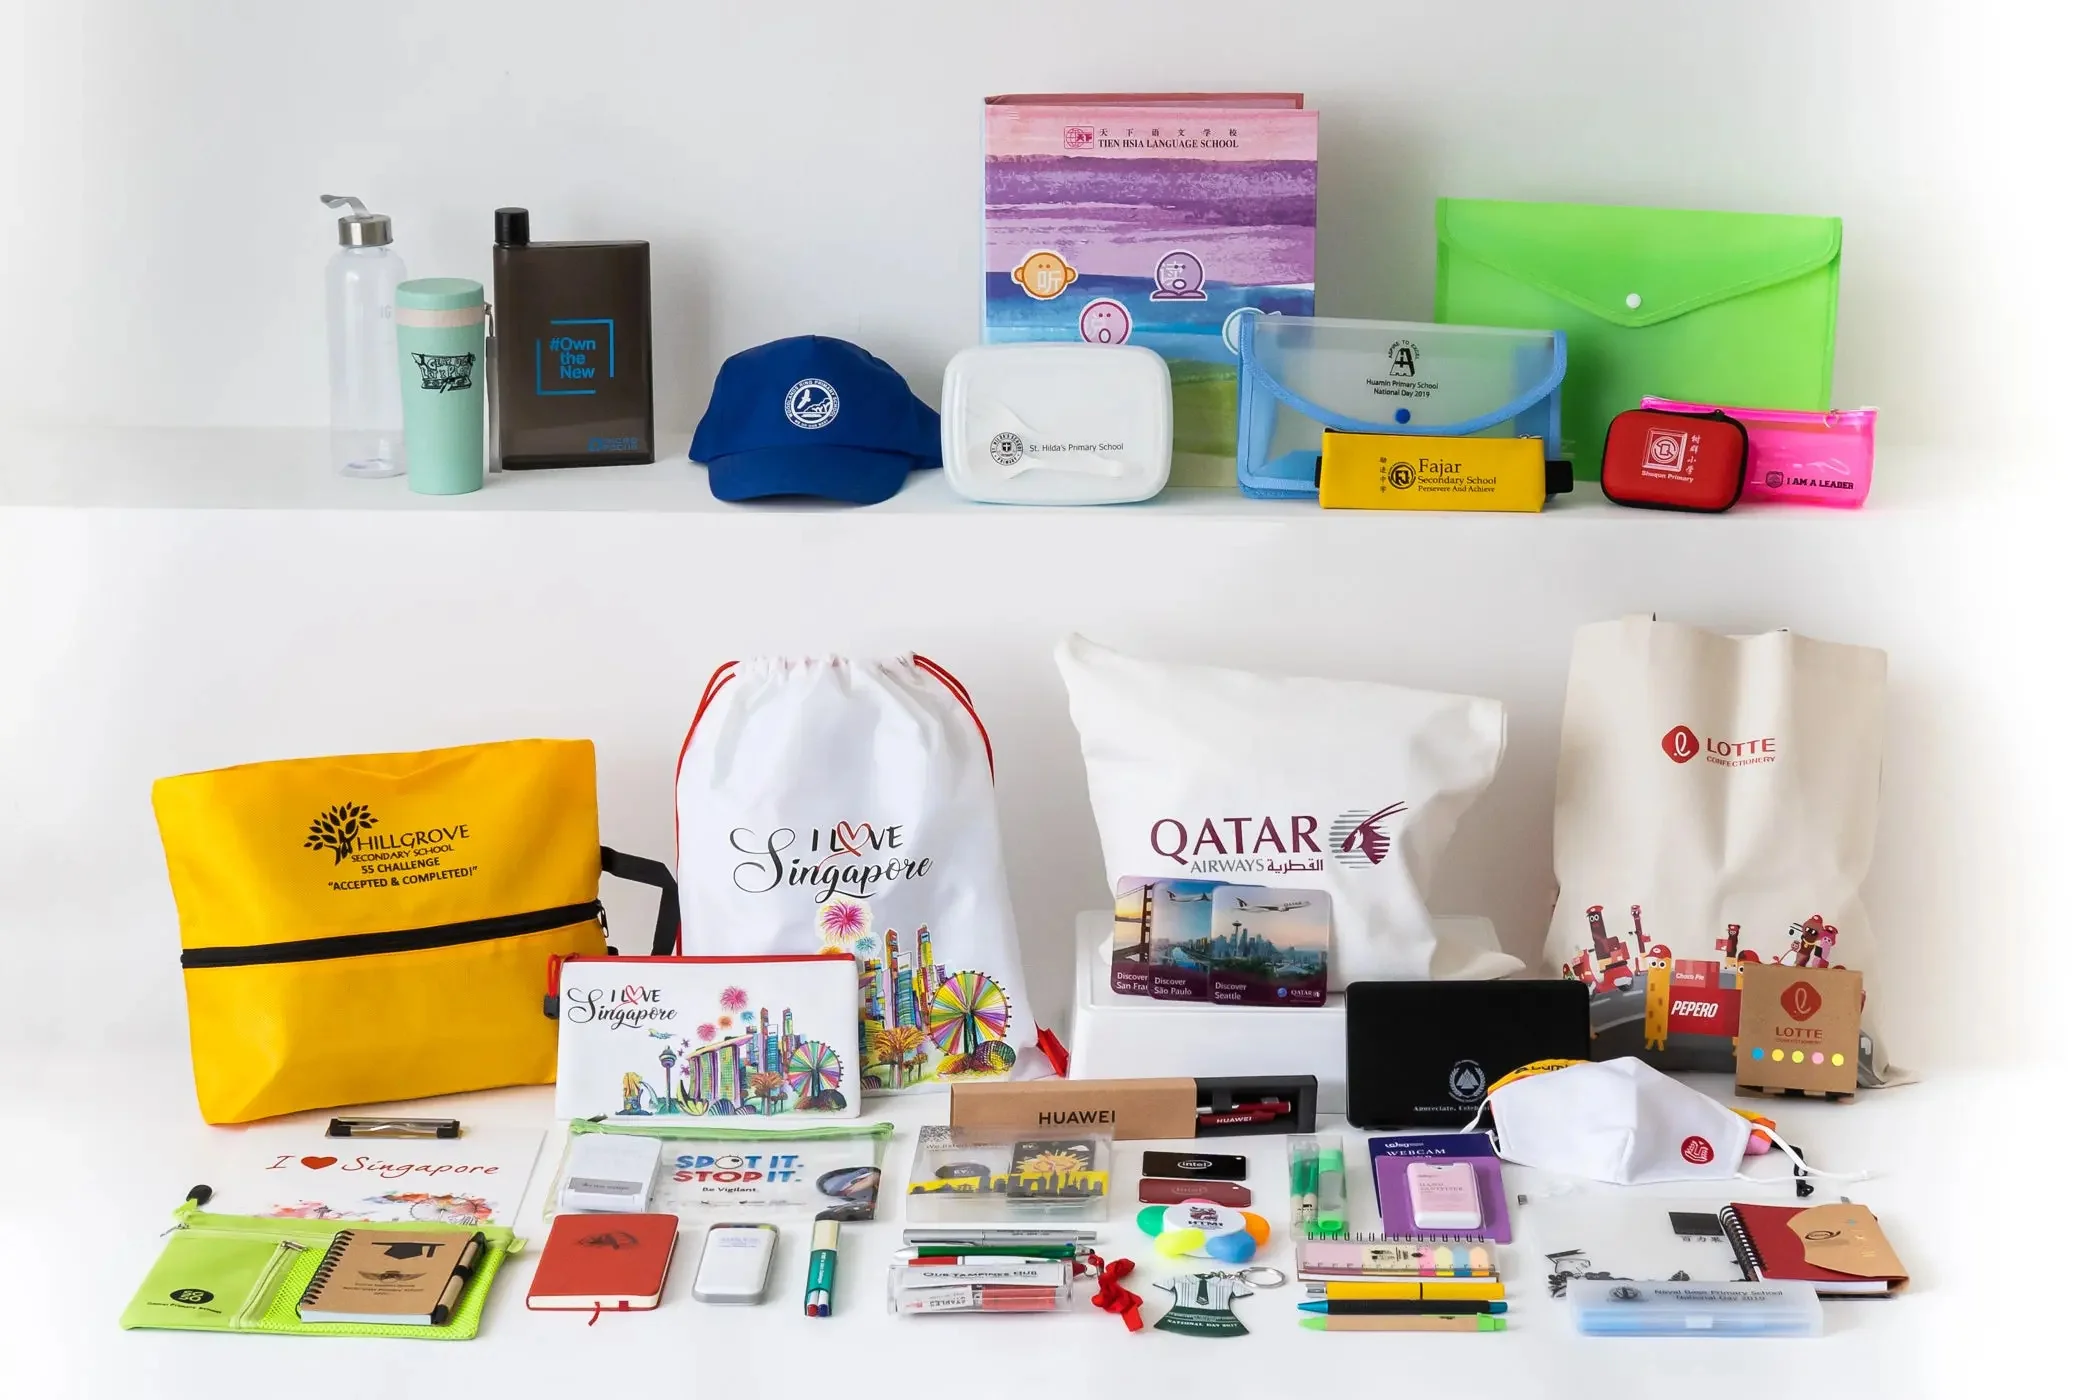 What Are the Most Important Factors in Selecting Corporate Gifts in Dubai?